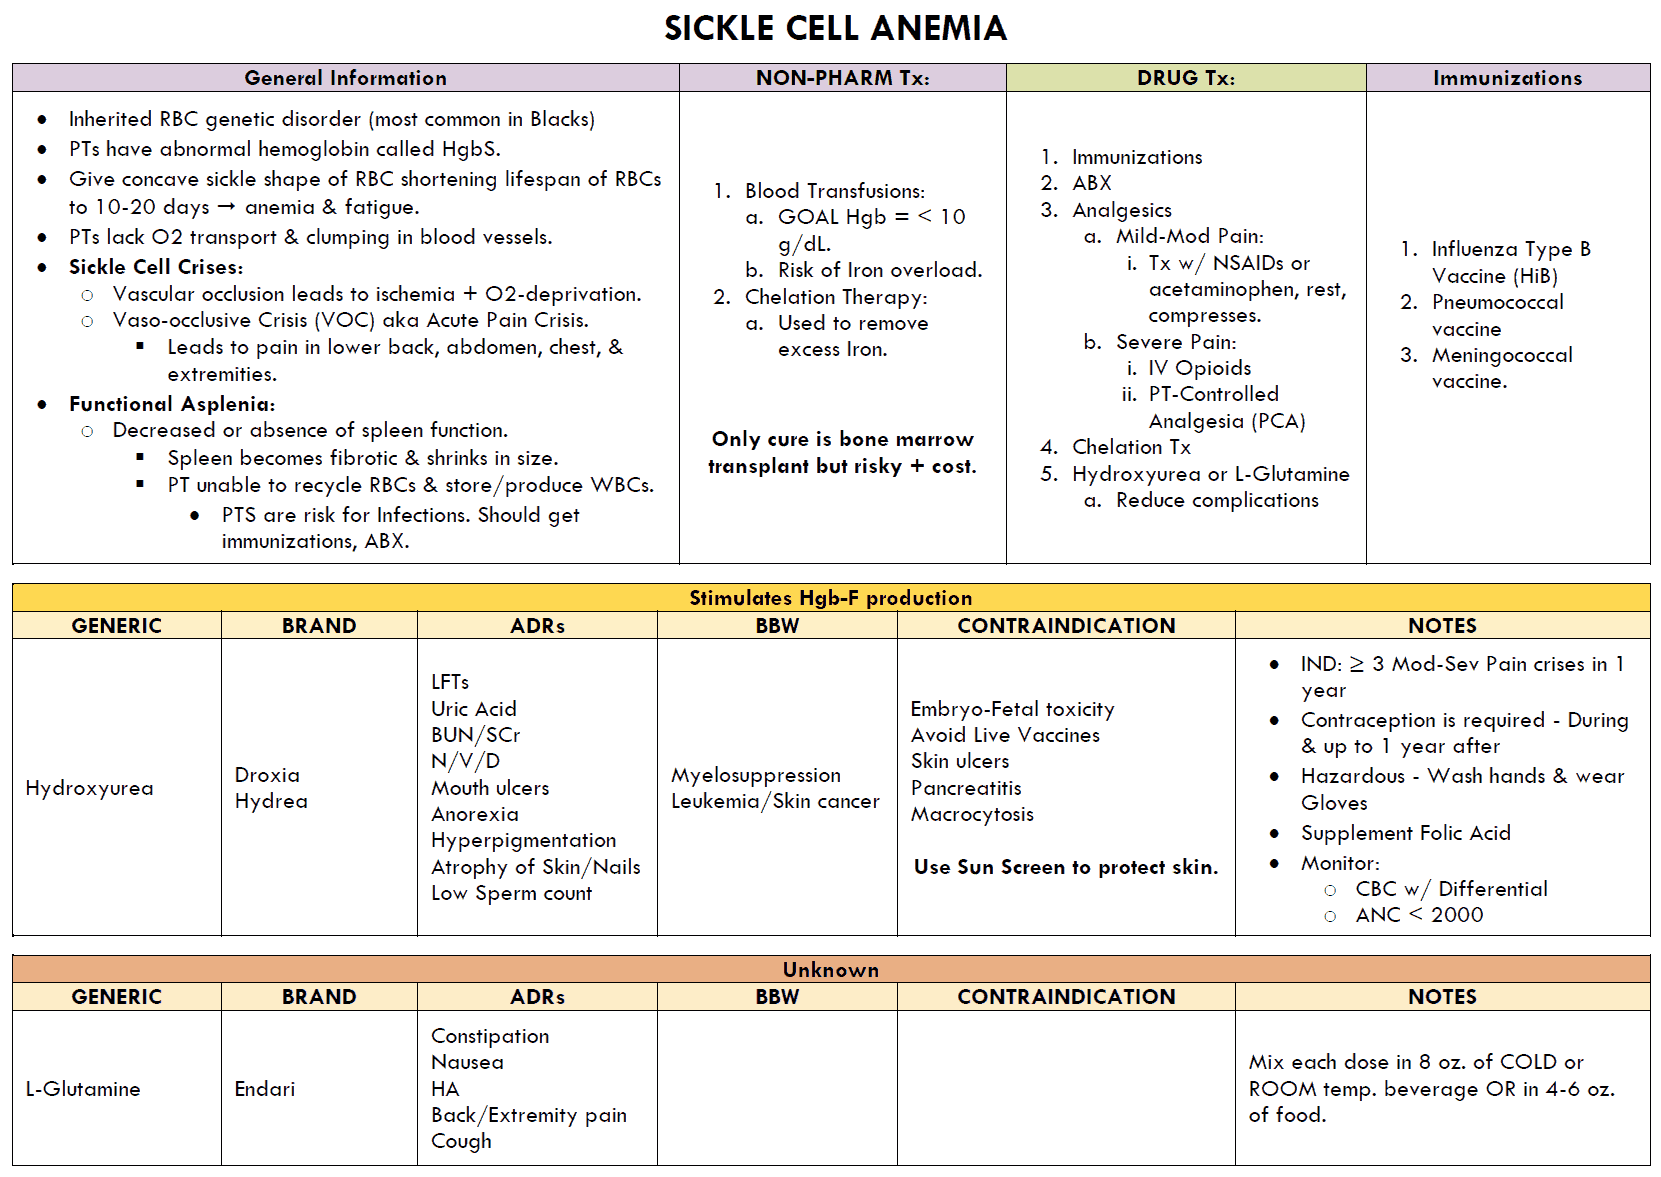 Sickle Cell Anemia - Summary